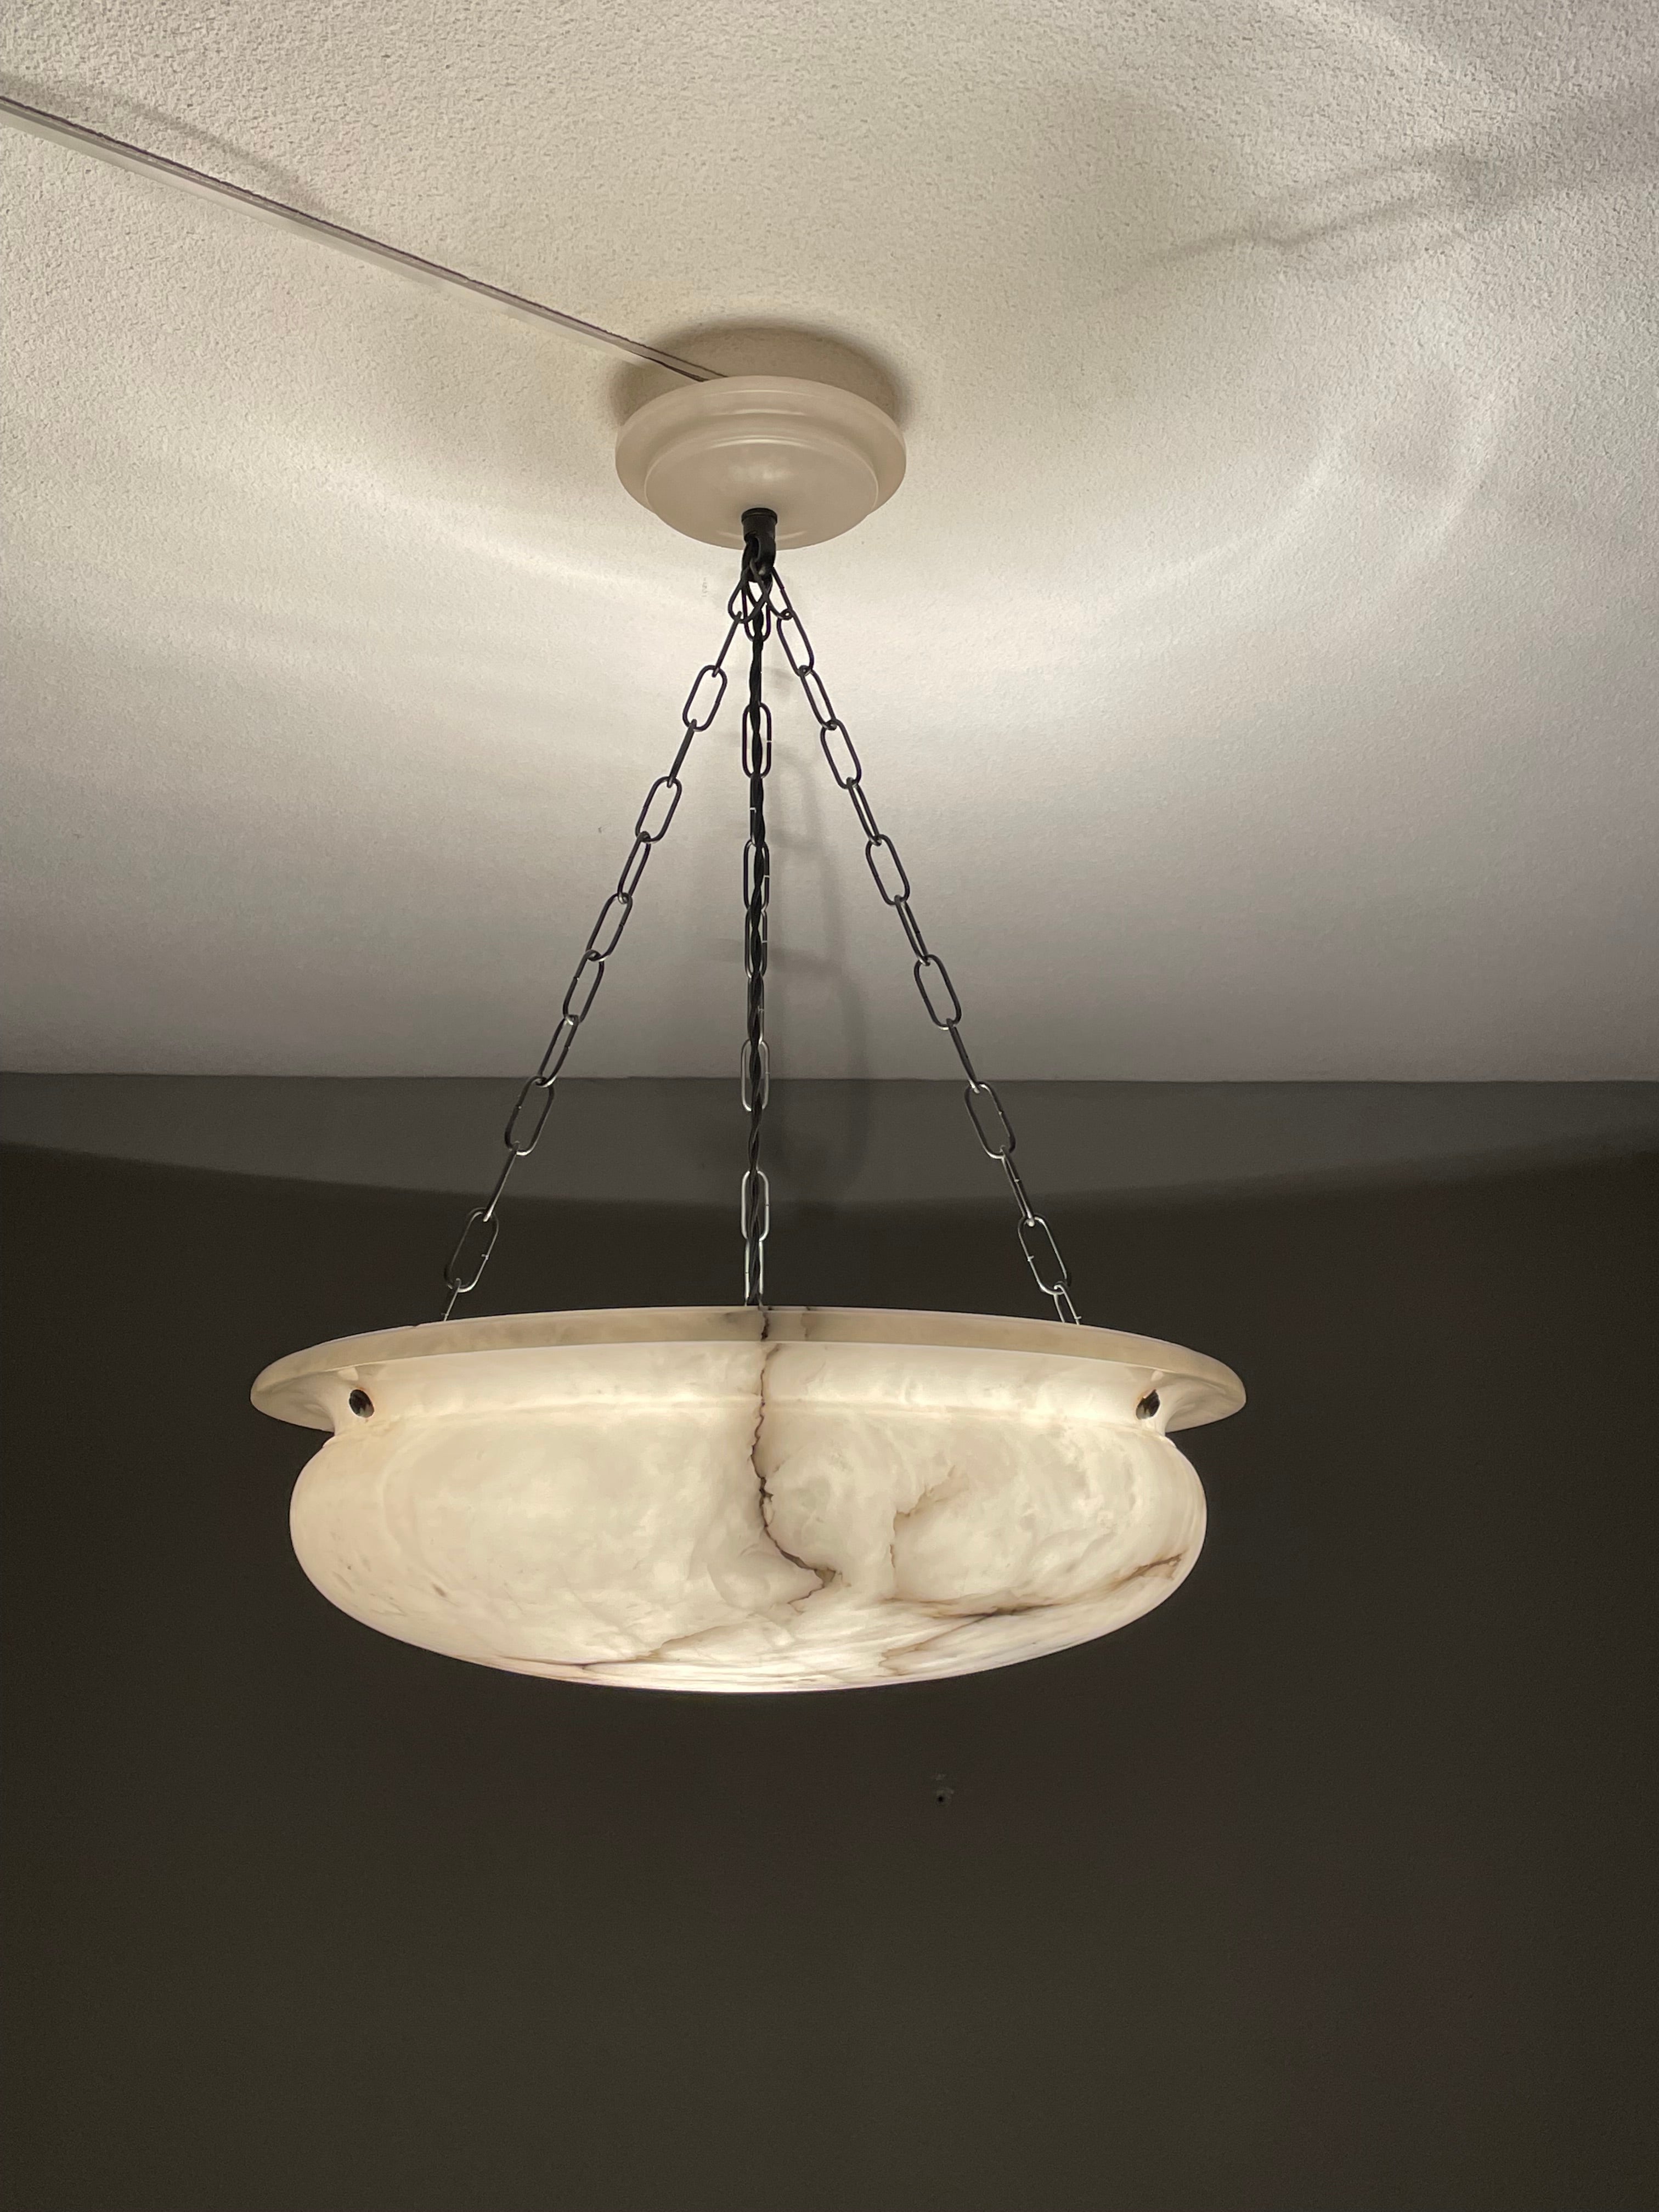 Stunning and the ideal size 17.5 inches in diameter alabaster light fixture.

Thanks to its large size and timeless design this alabaster chandelier from the Arts and Crafts era is one of the most beautiful models we have seen and sold to date. We